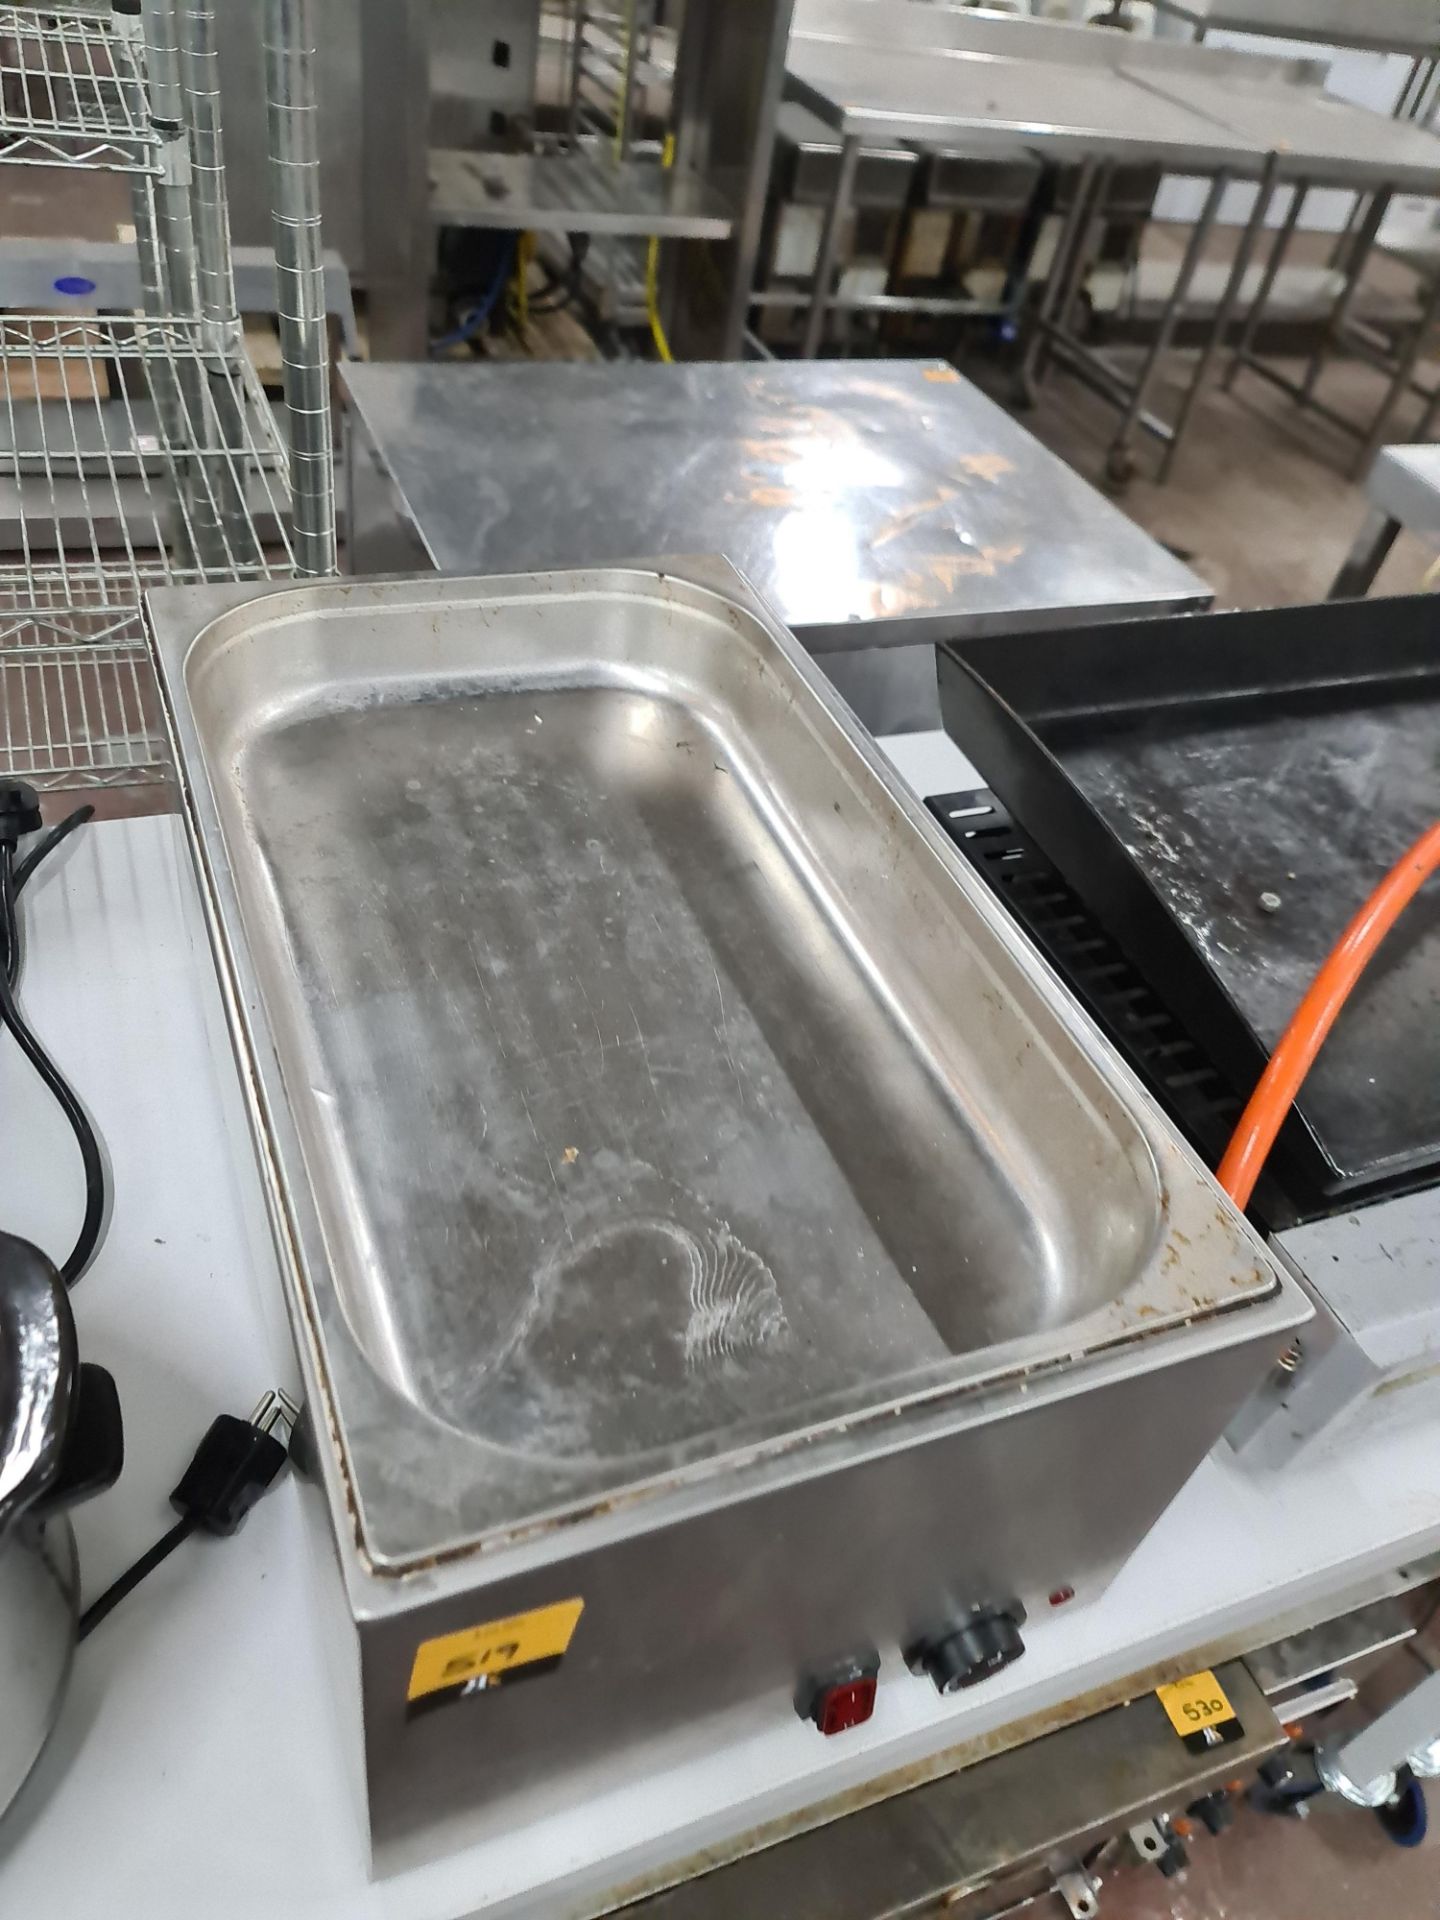 Bench top stainless steel bain marie/warming unit - Image 2 of 3